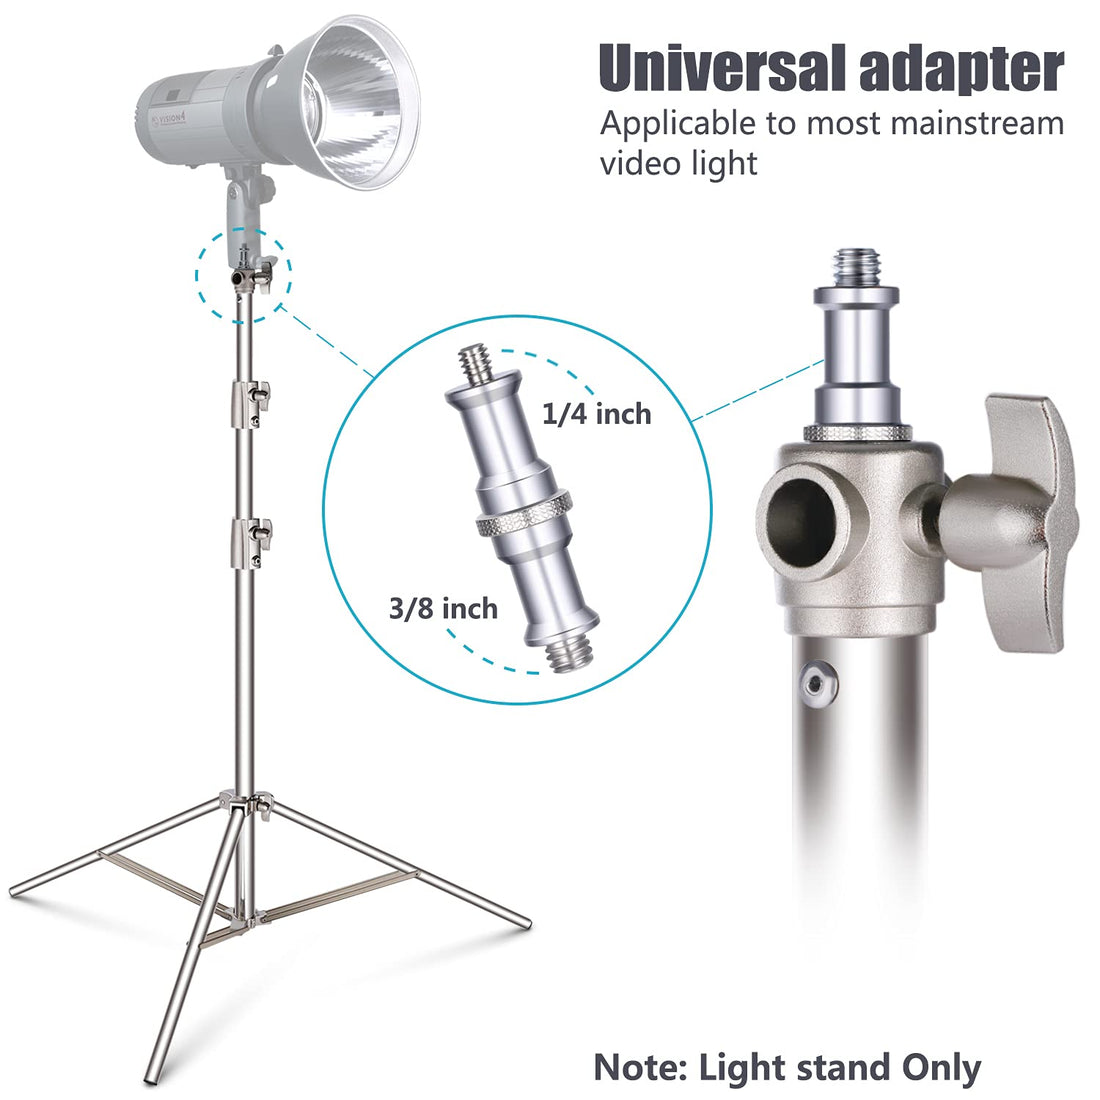 Neewer Heavy Duty 39-114 inches/99-290 Centimeters Adjustable Light Stand with 1/4-inch to 3/8-inch Universal Adapter for Studio Softbox, Monolight and Other Photographic Equipment, Stainless Steel